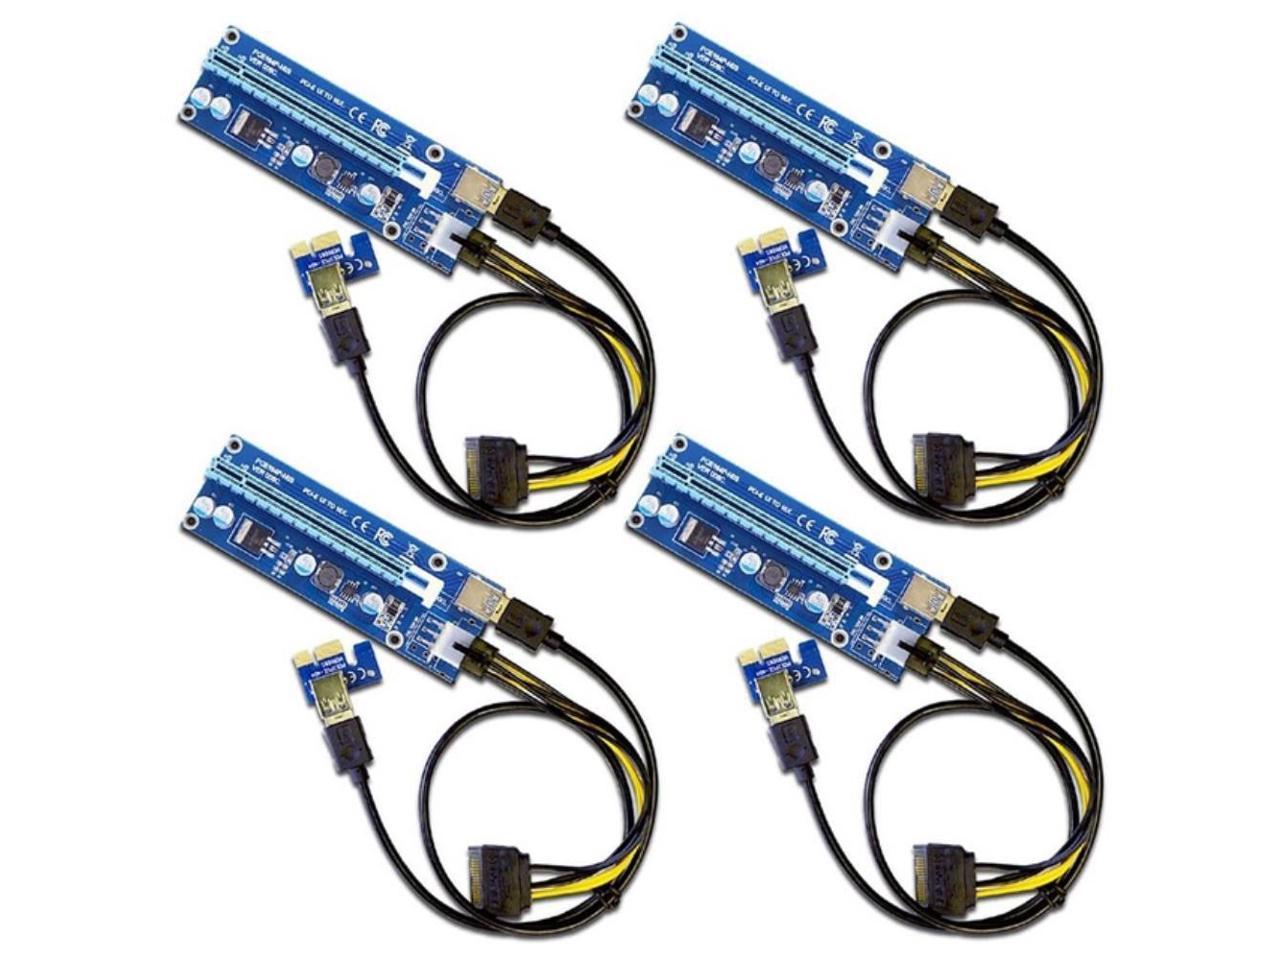 6Pcs USB PCI Express 1x to 16x Extender Riser Card Adapter 6Pin Power CableV2017 